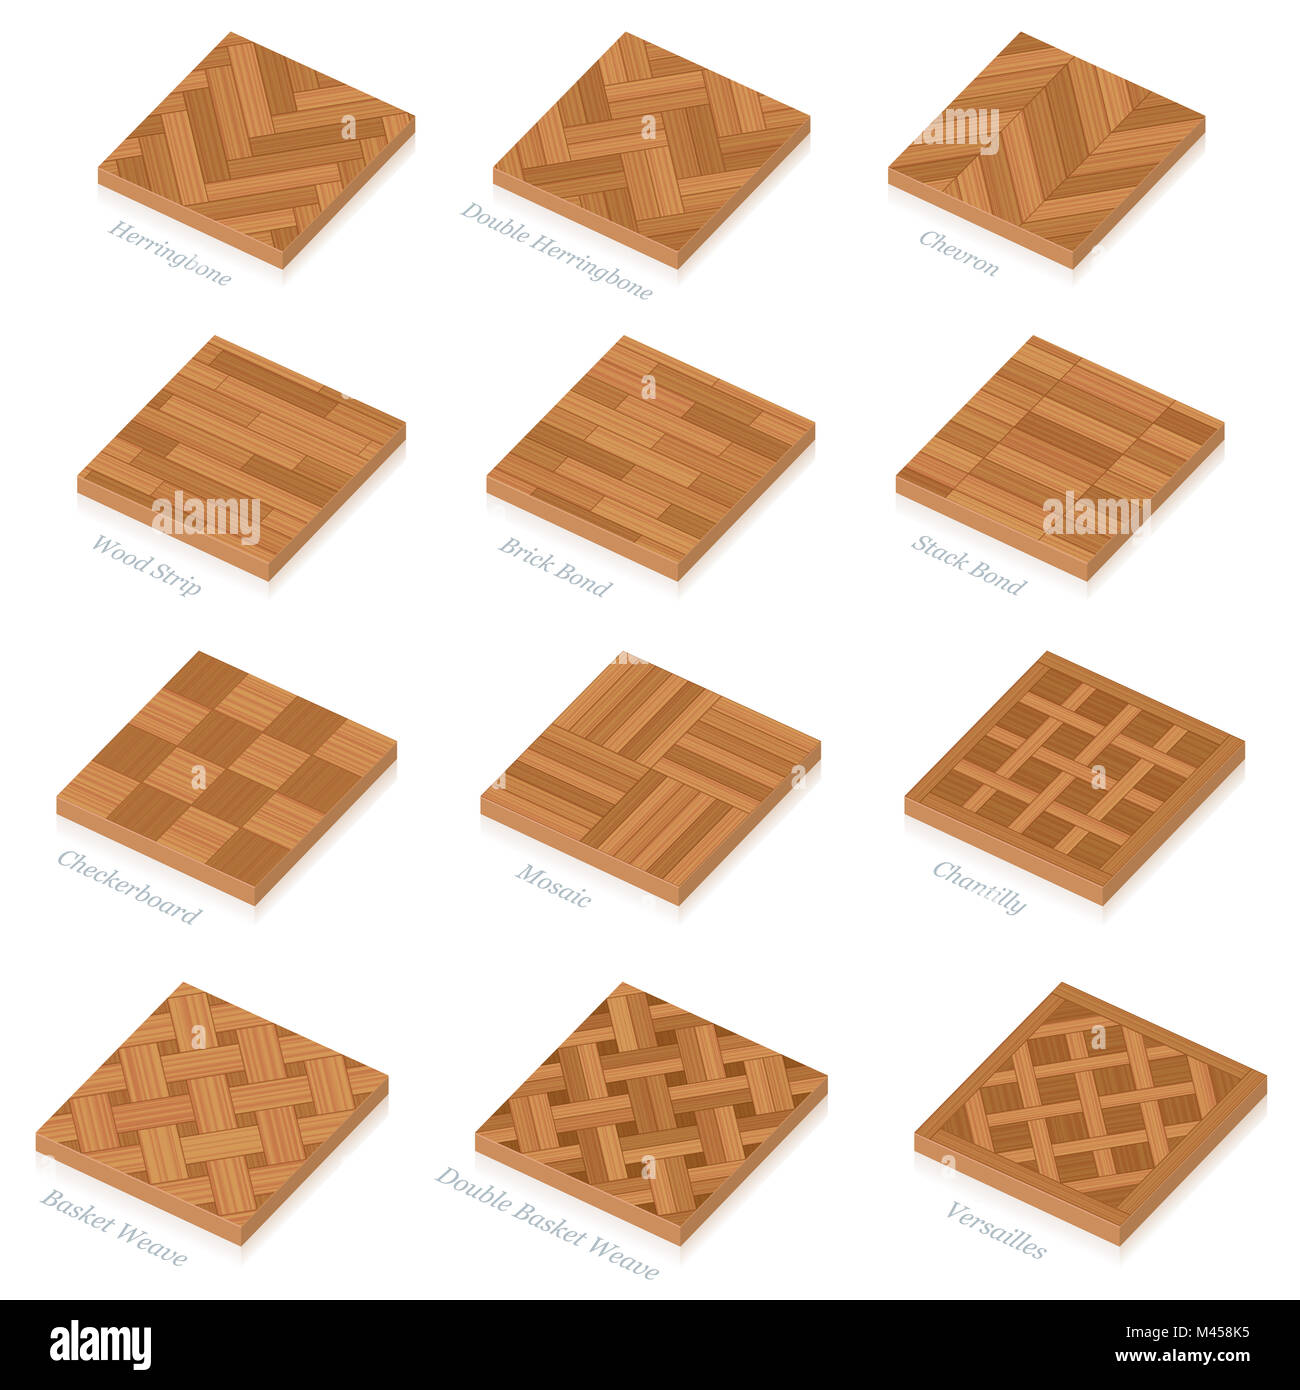 Parquetry. Three-dimensional wooden floor plates. Most popular wood flooring parquets with names - 3D illustration on white background Stock Photo